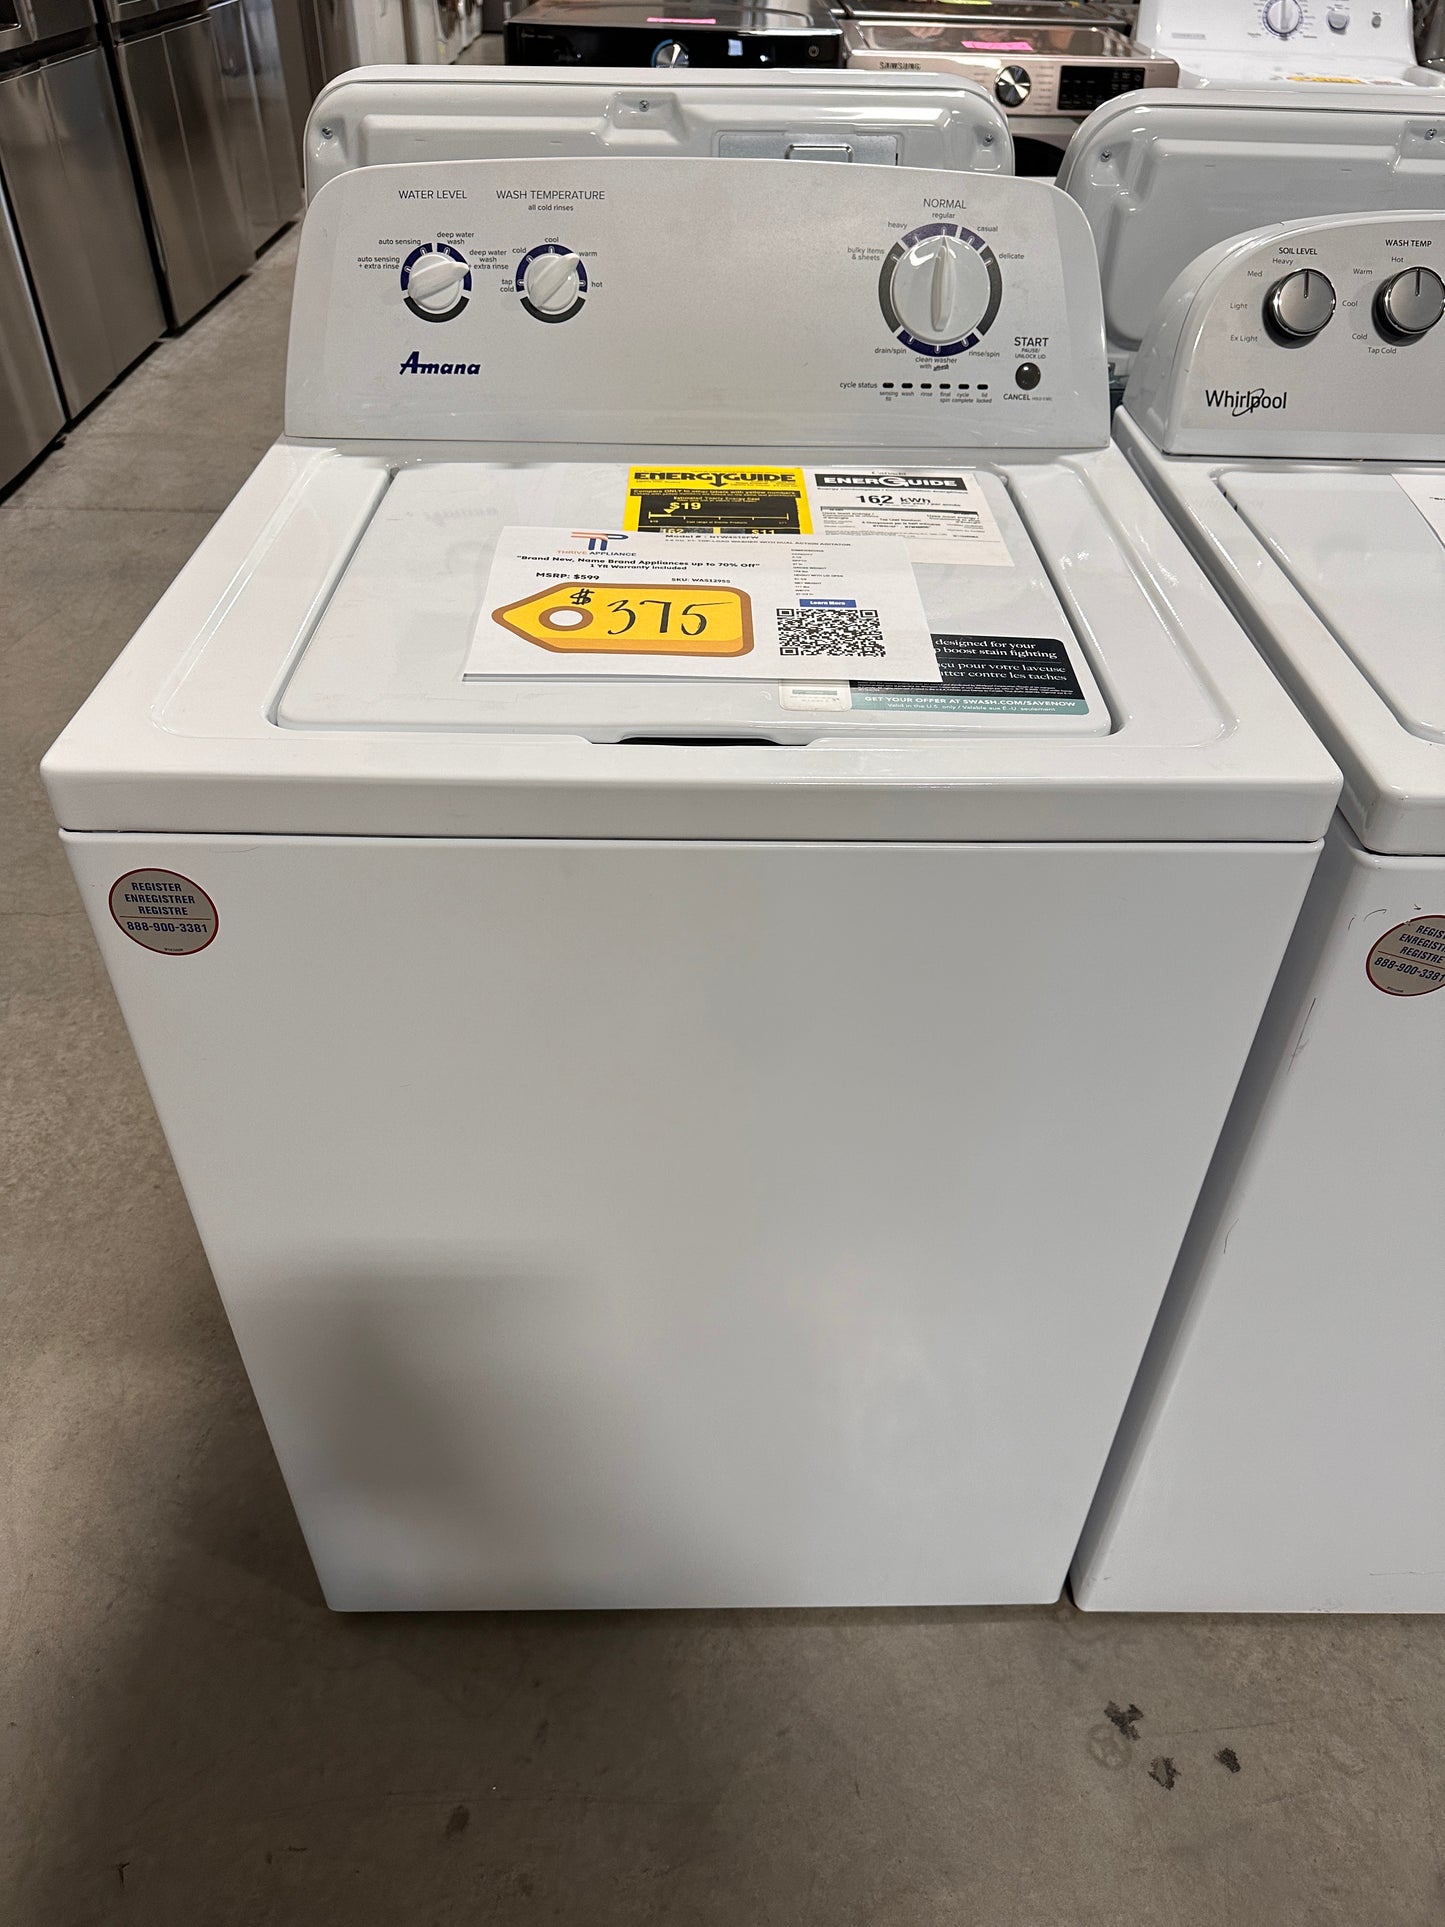 GREAT NEW TOP LOAD WASHER with AGITATOR - WAS12955 NTW4516FW